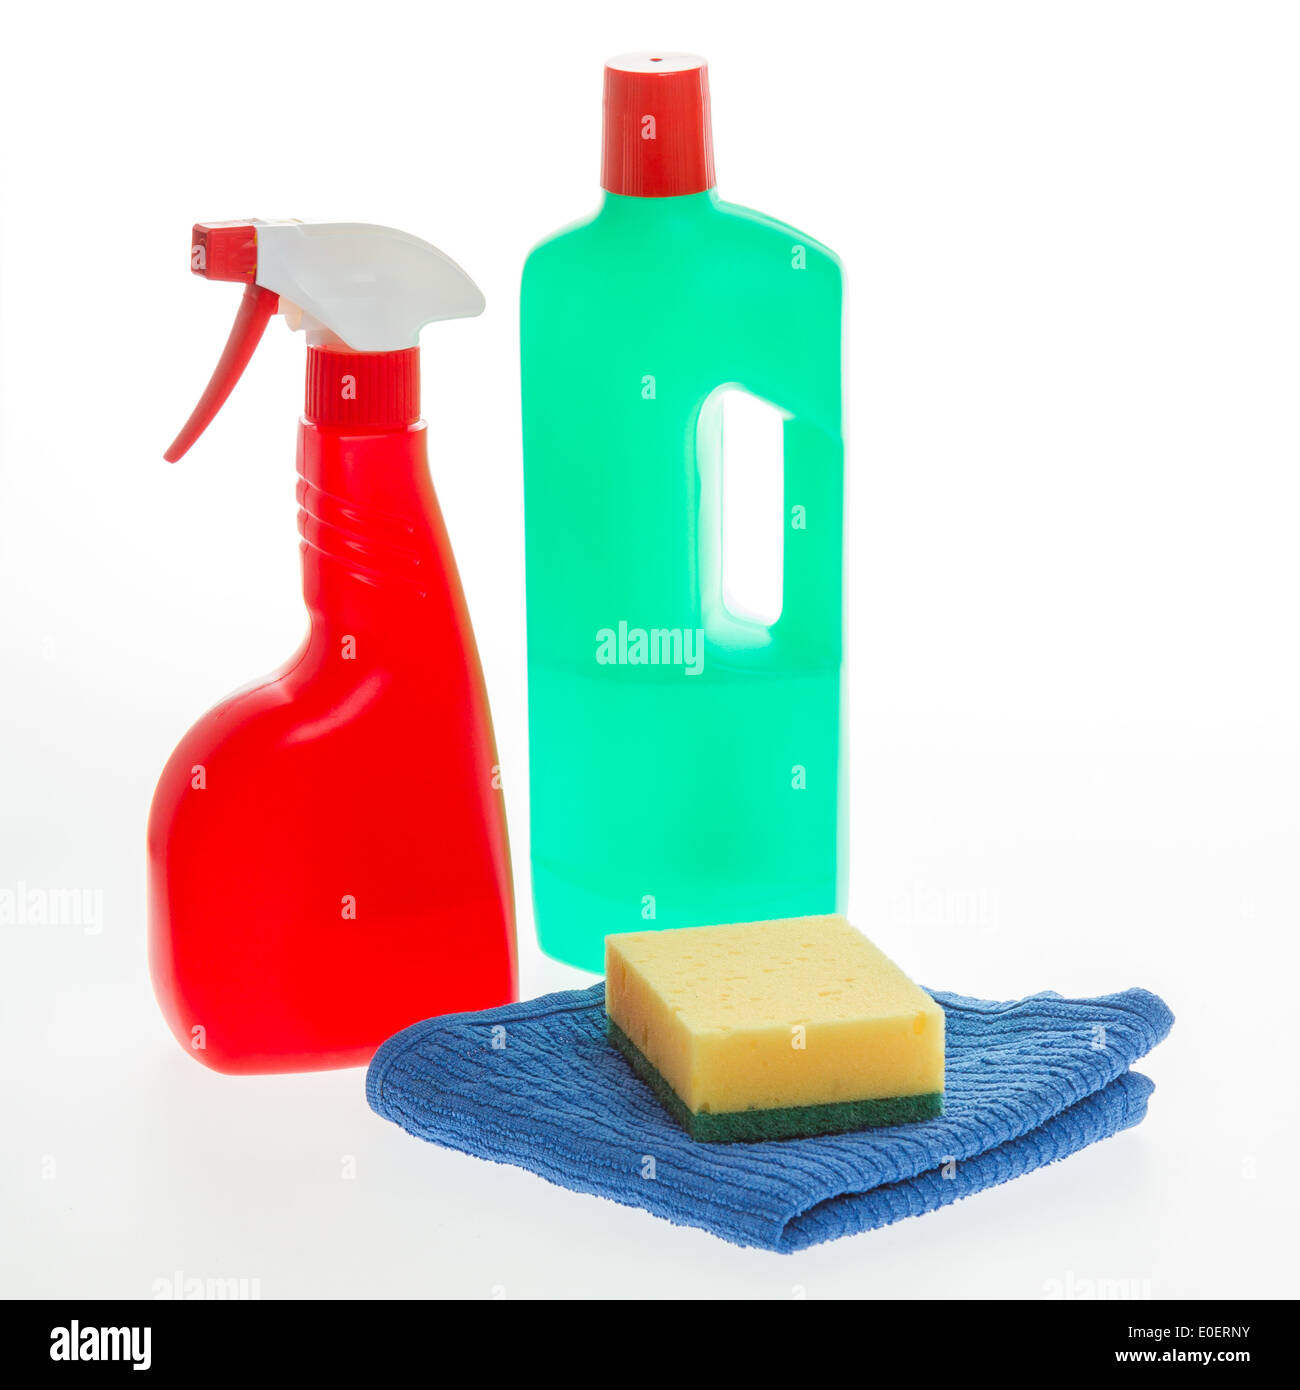 House cleaning product. Plastic bottles with detergent and sponge isolated on white background Stock Photo